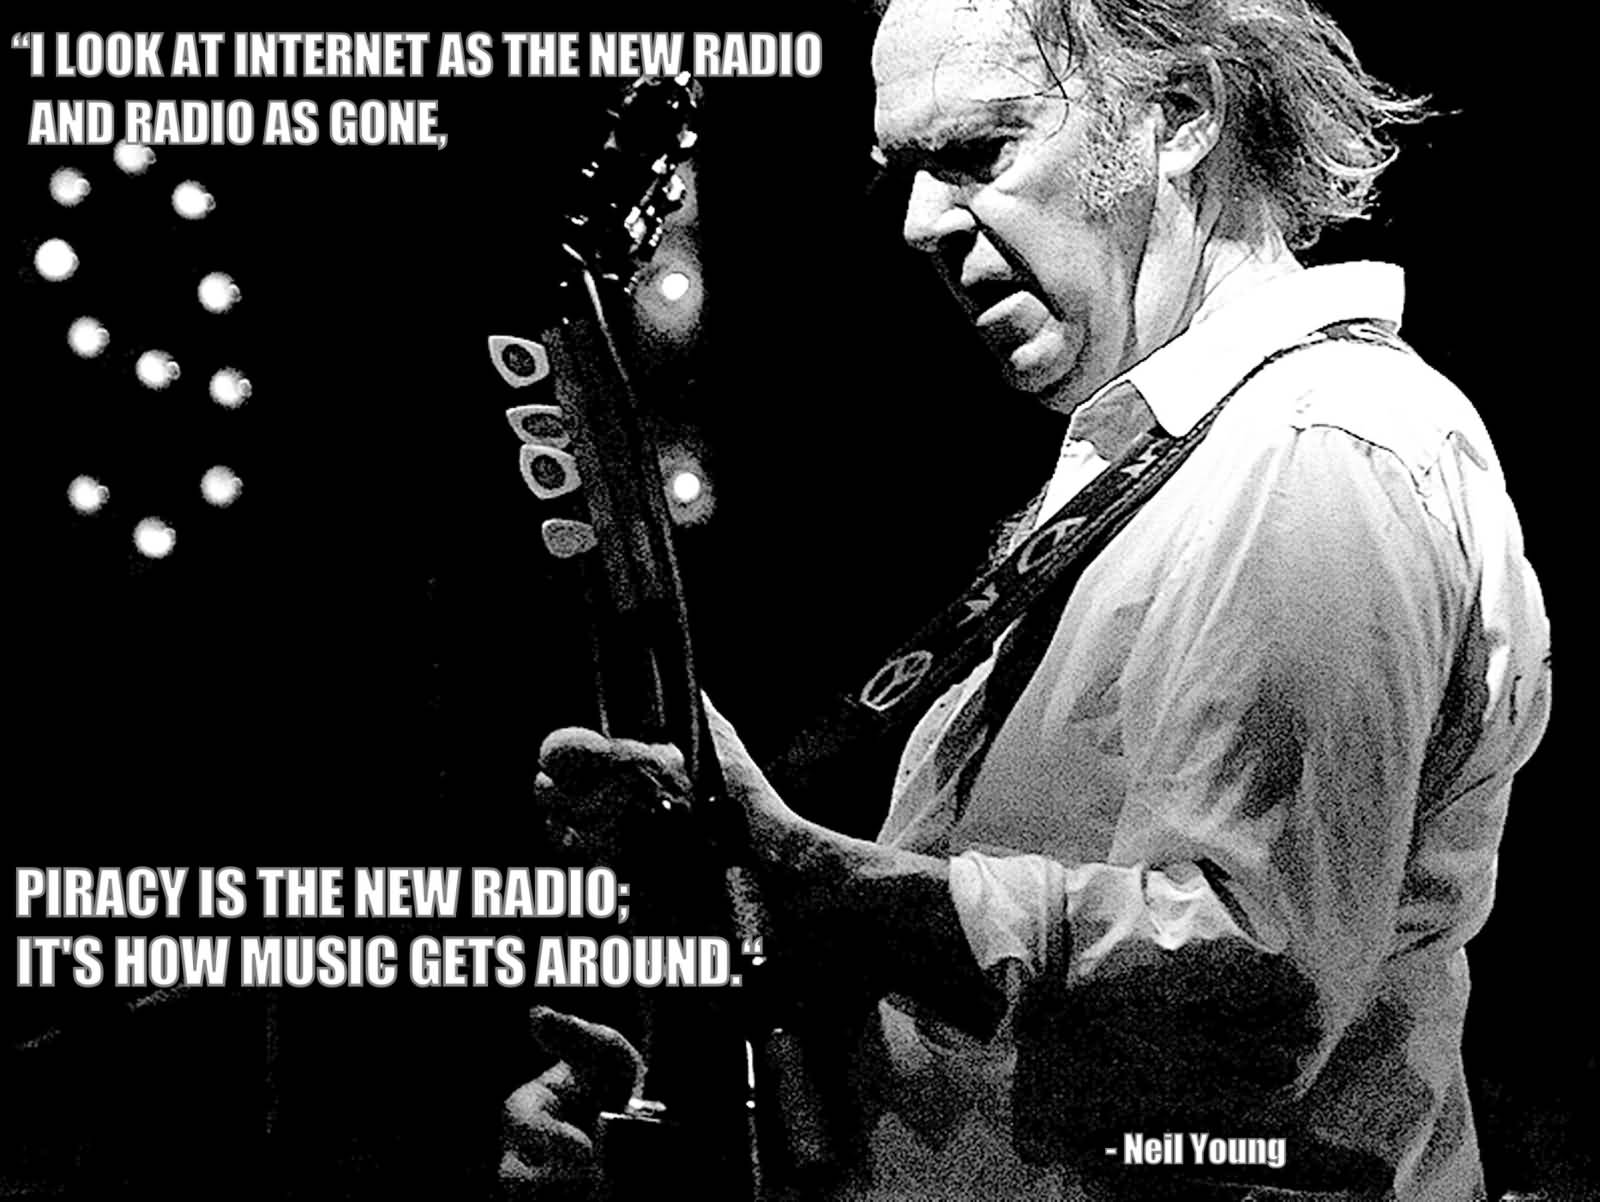 I look at internet as the new radio and radio as gone piracy is the new radio it’s how.. Neil Young